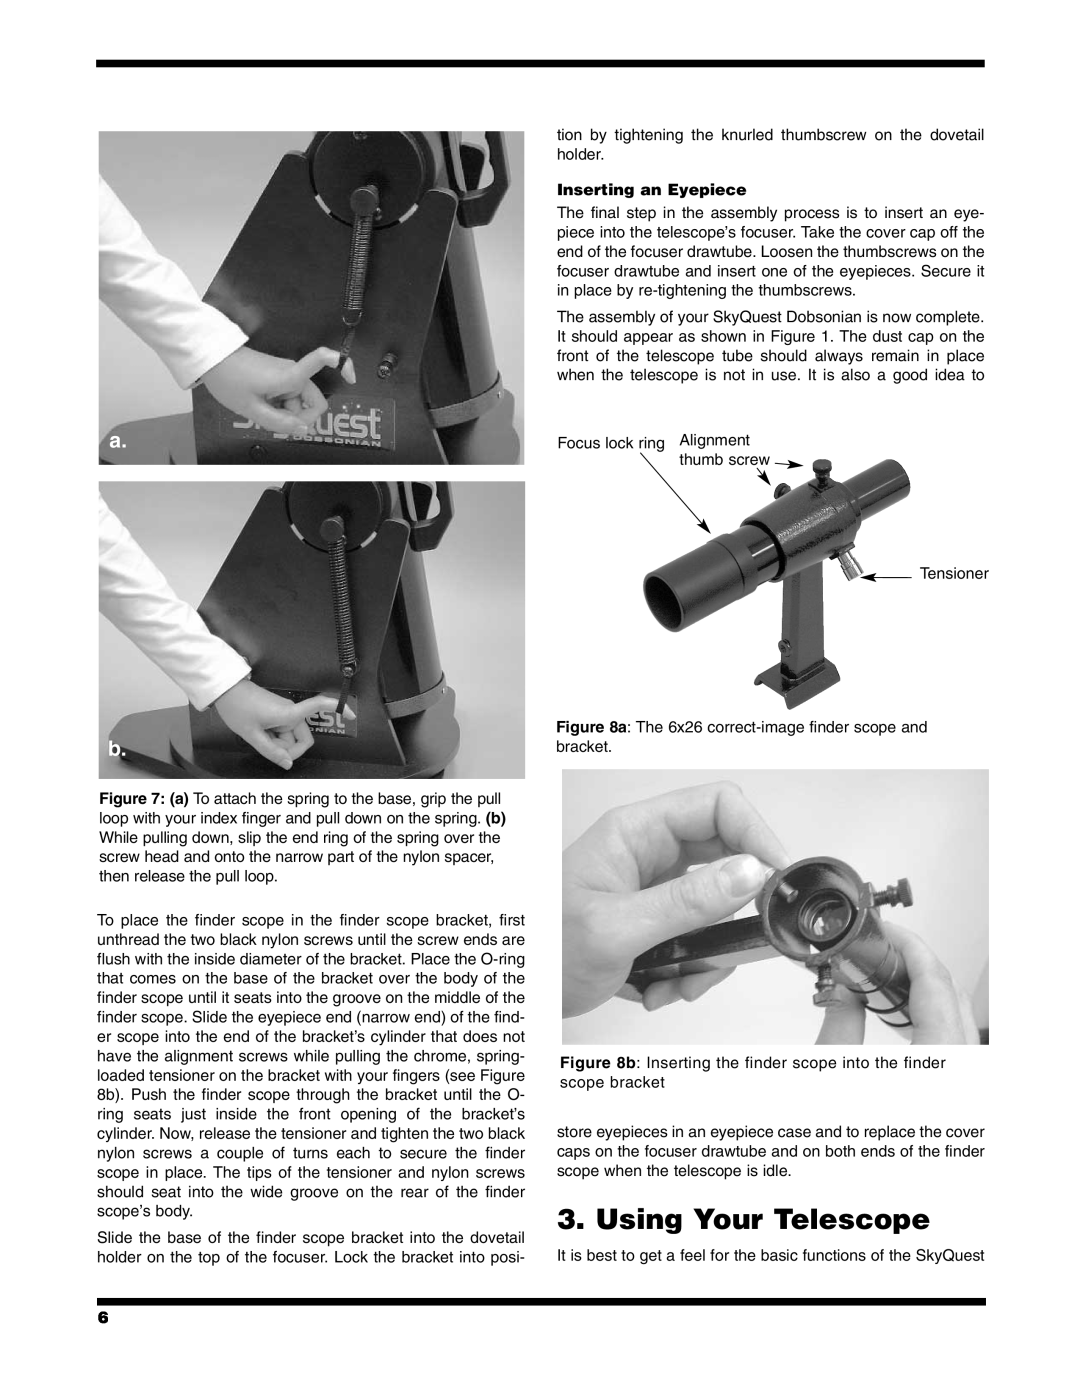 Orion XT4.5 instruction manual Using Your Telescope, Inserting an Eyepiece 